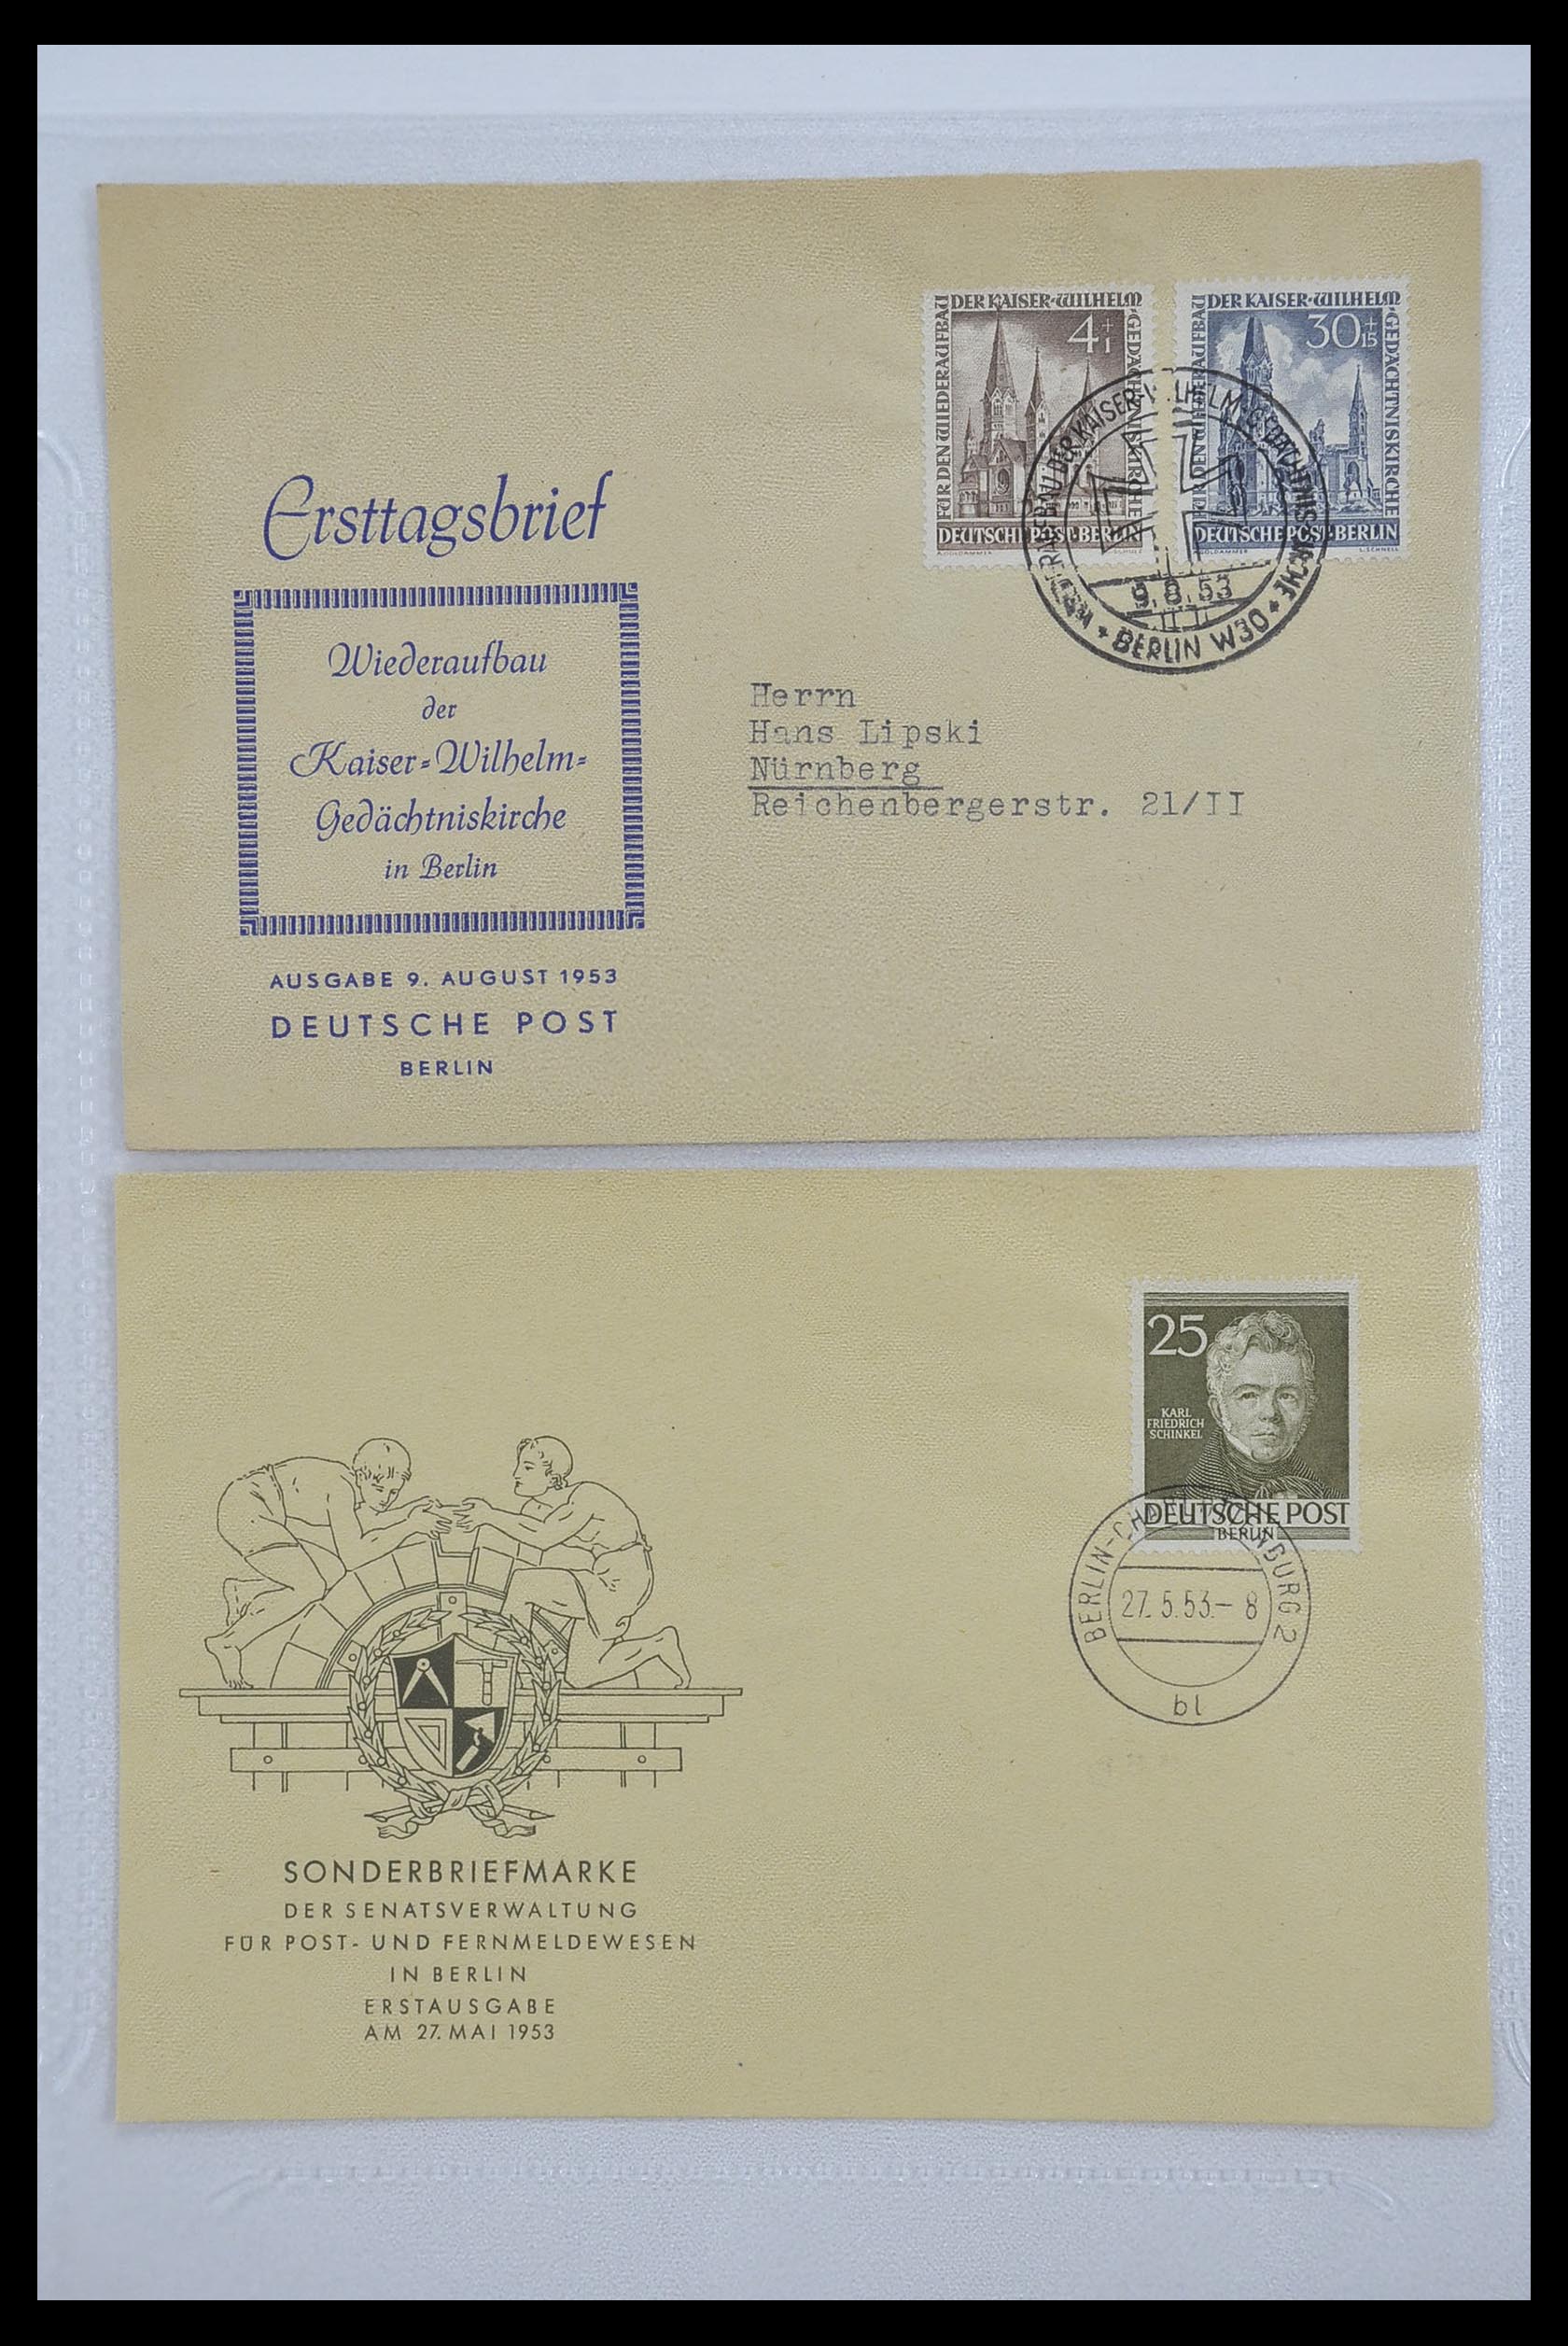 33290 055 - Stamp collection 33290 Berlin covers 1948-1957.